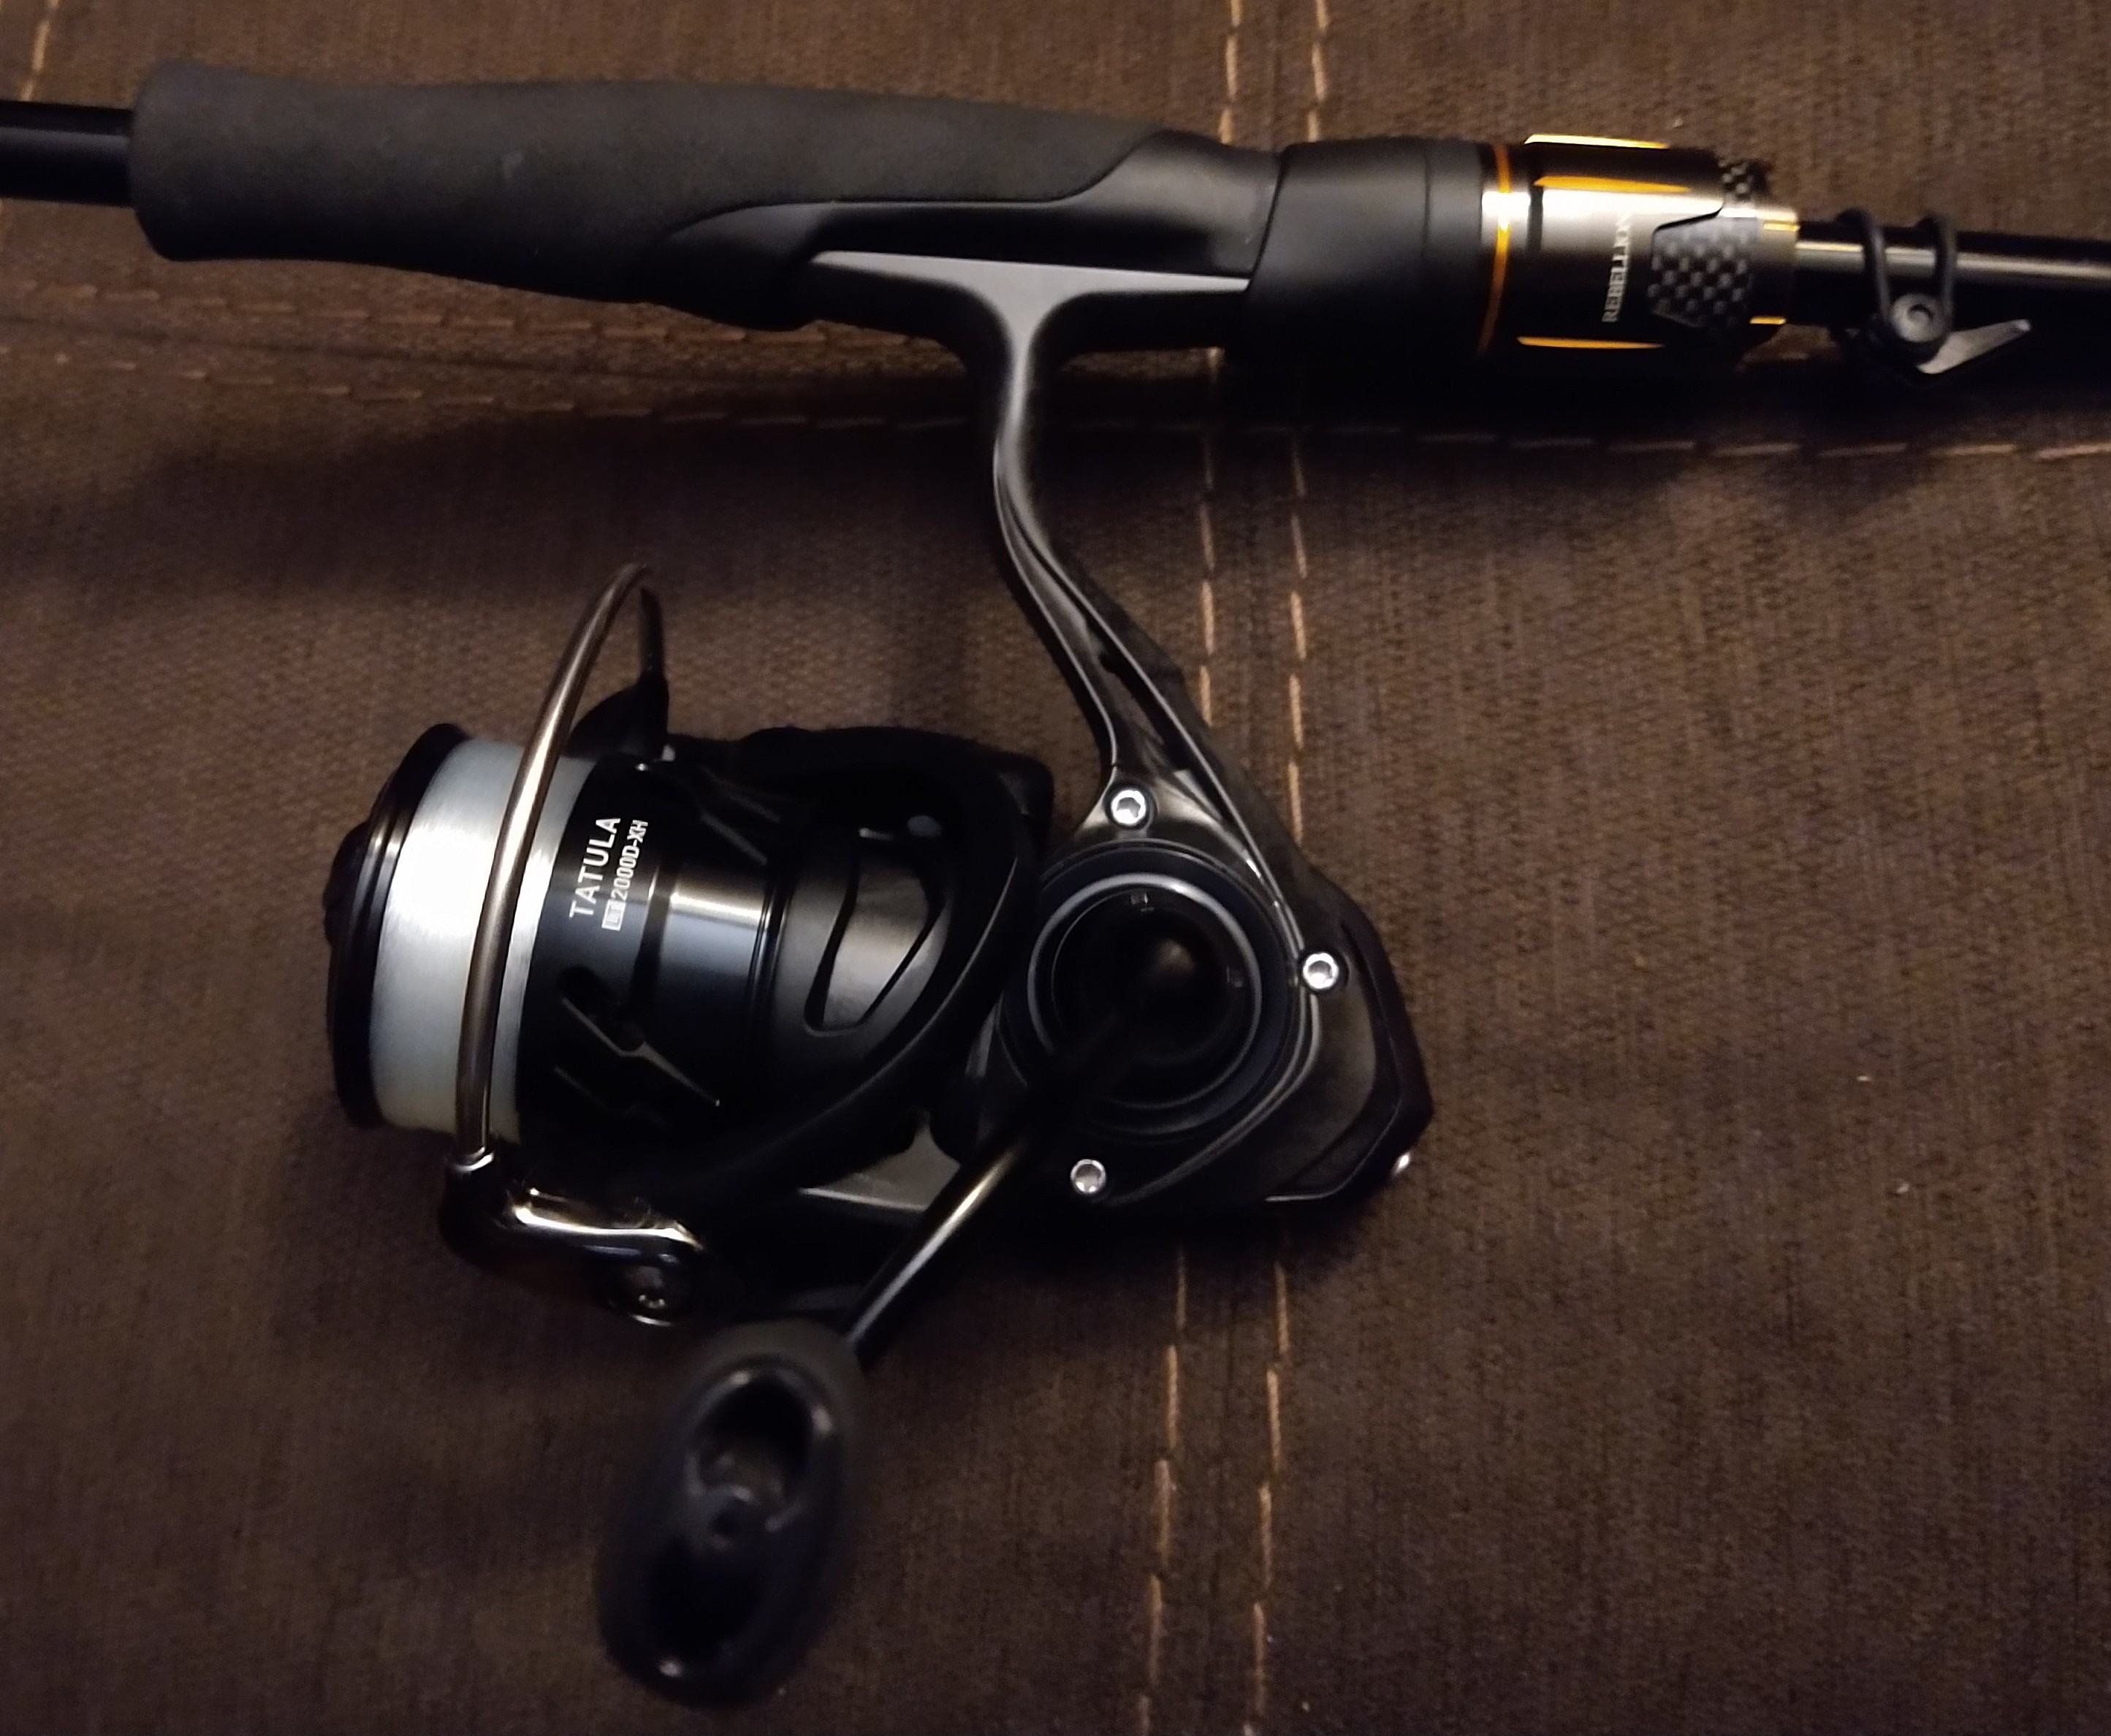 Who's good at add on rod end balancing ? - Fishing Rods, Reels